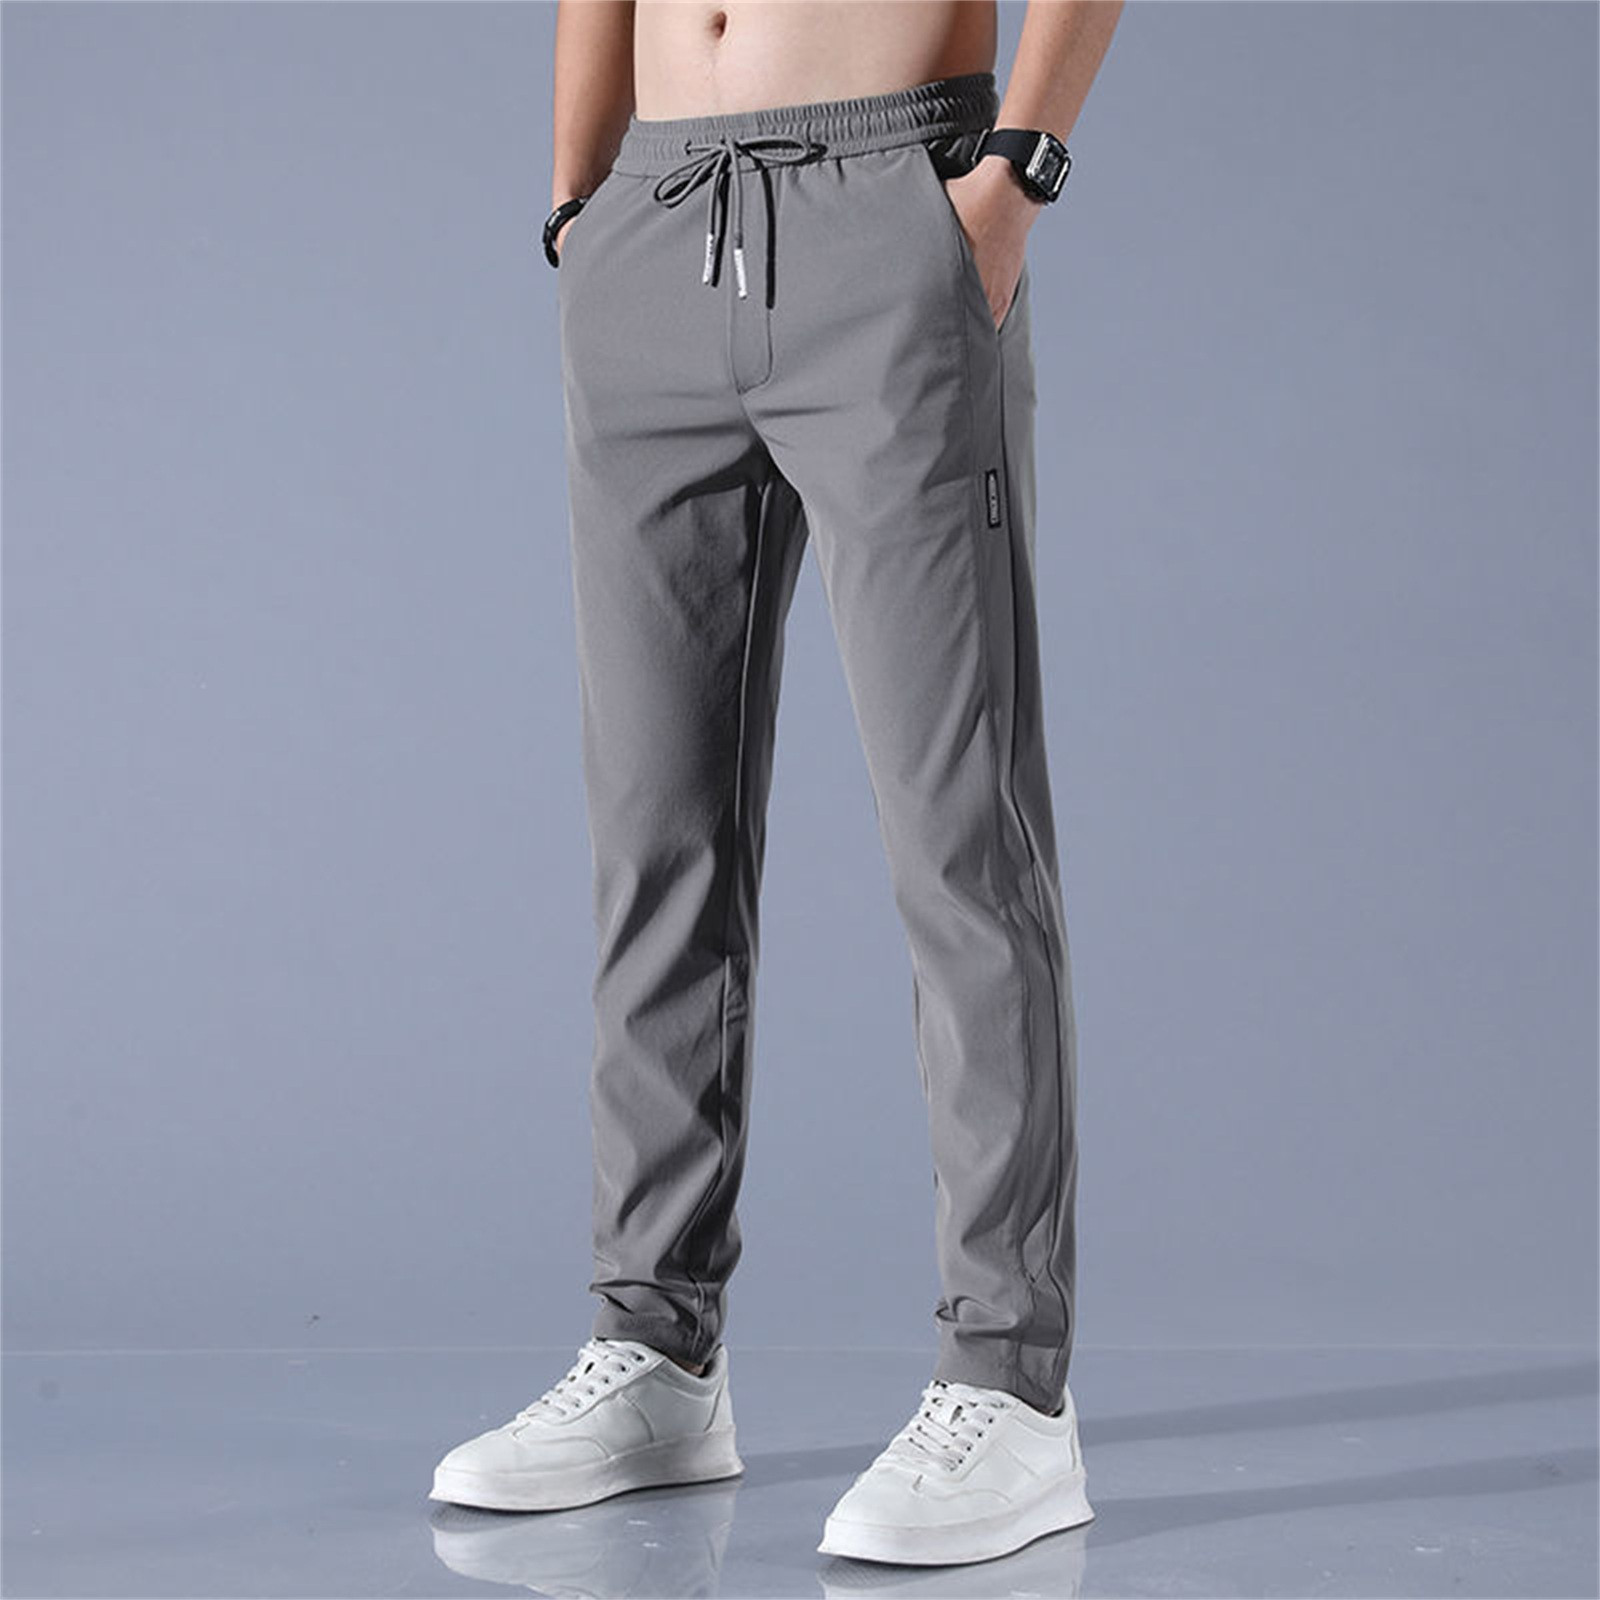 Gray Young Adult Clothing With Deep Pockets Loose Fit Casual Jogging ...